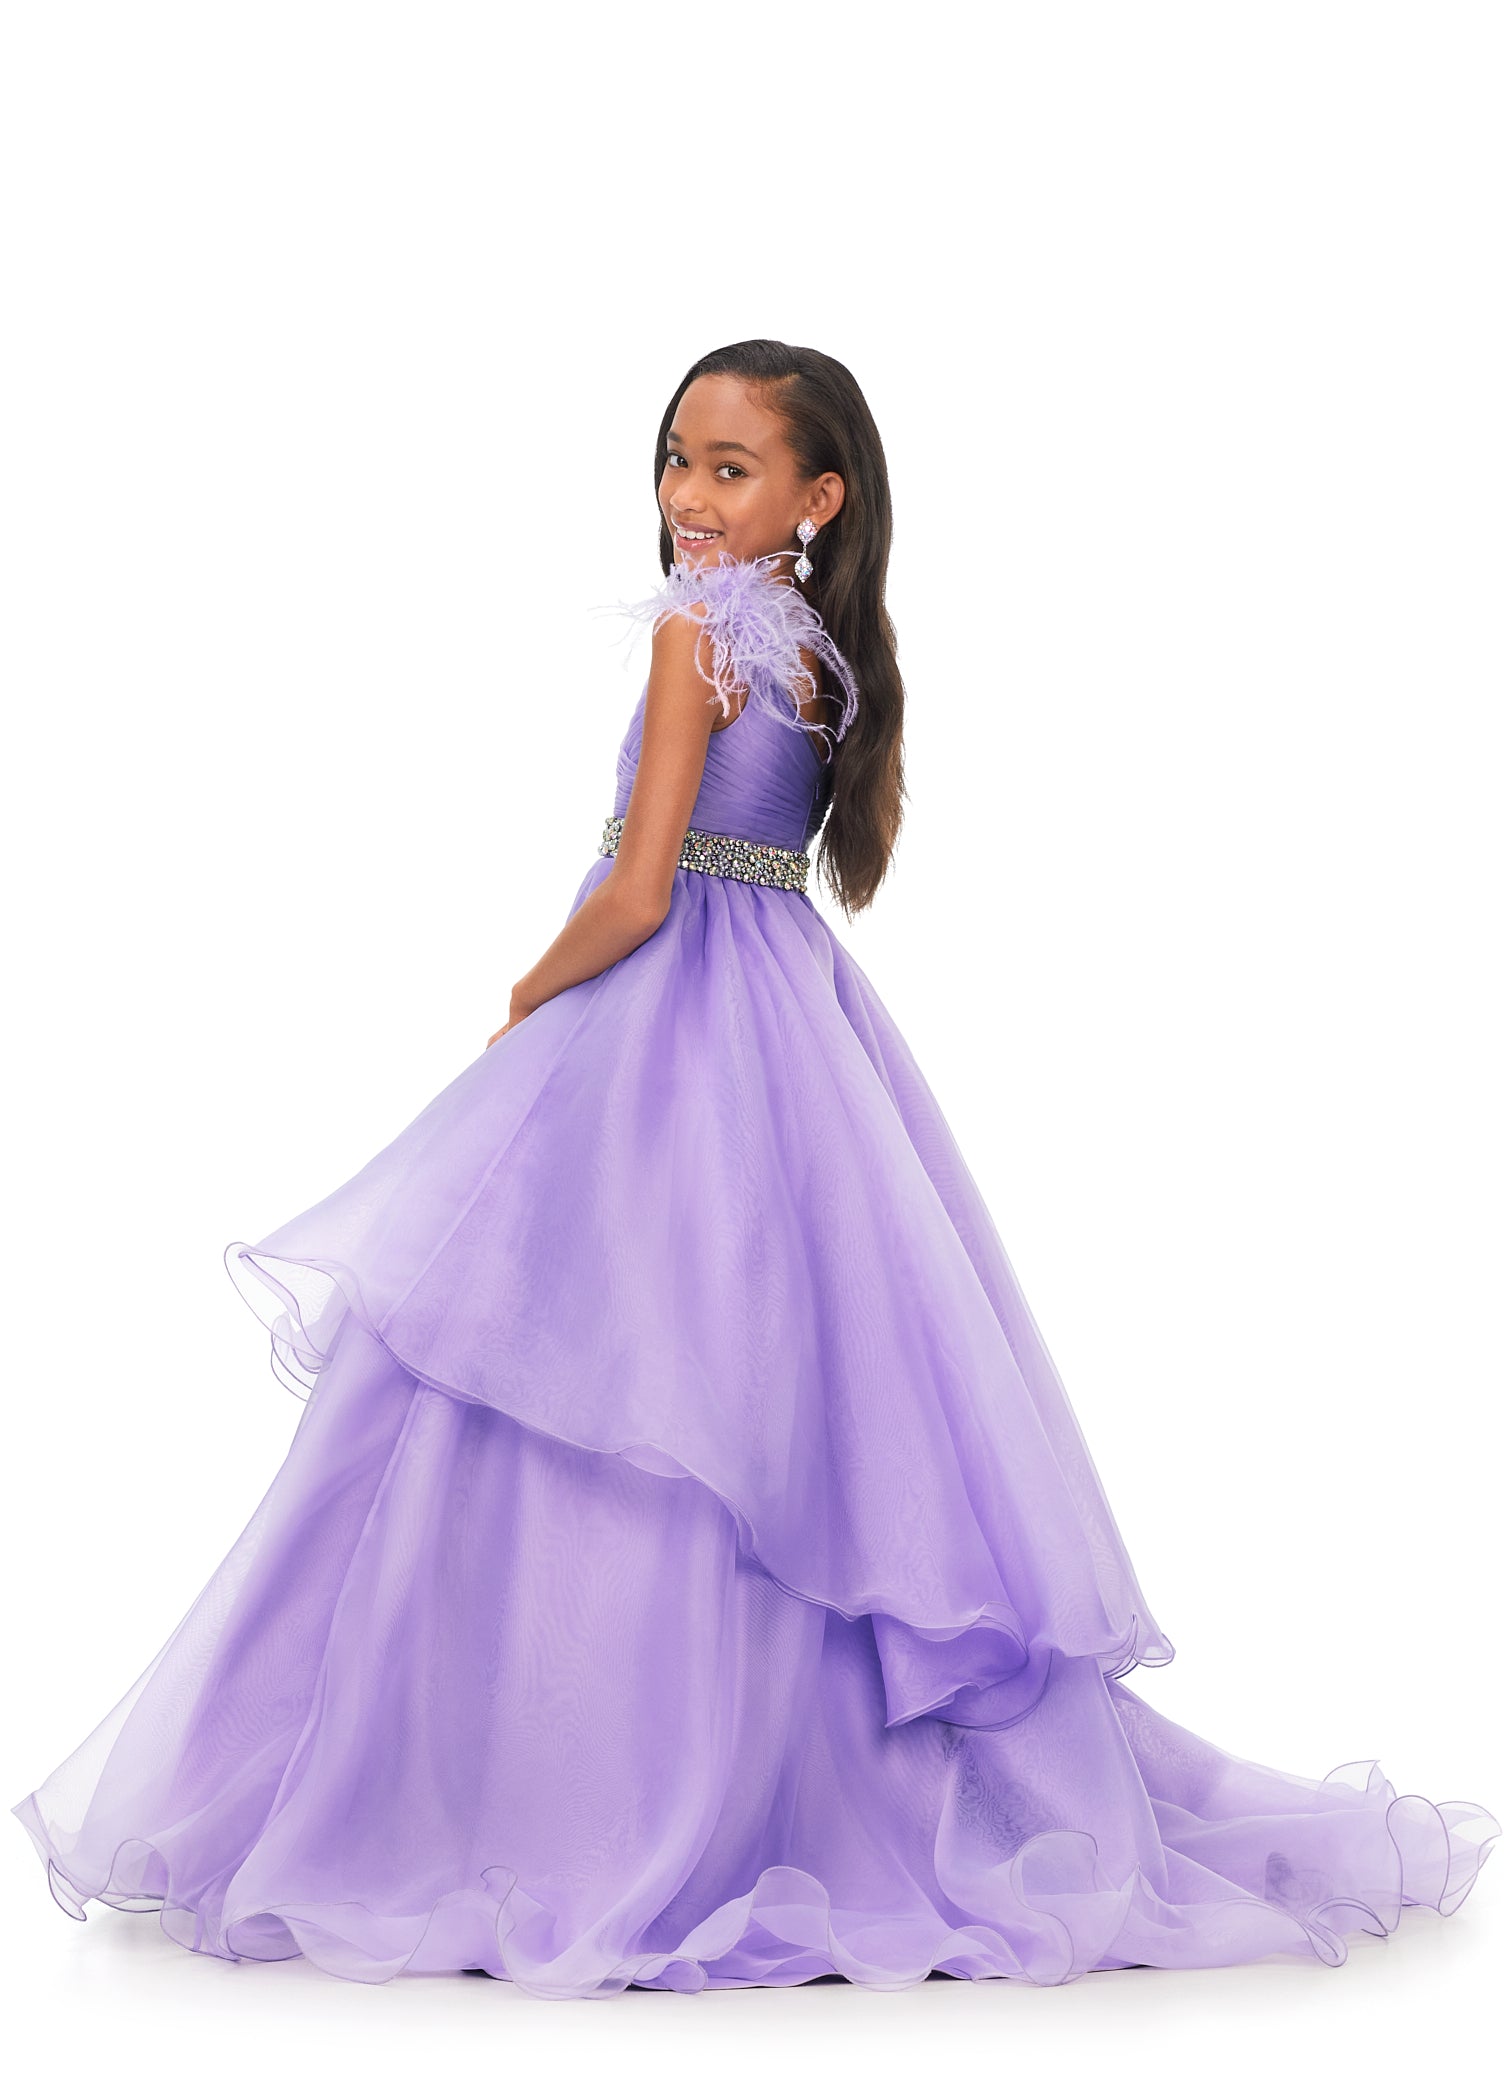 Ashley Lauren Kids 8184 Girls Pageant Dress Ball Gown with Feather Details  This organza kids ball gown features feather shoulders cascading to a crystal encrusted waistline. The layered skirt completes the look.